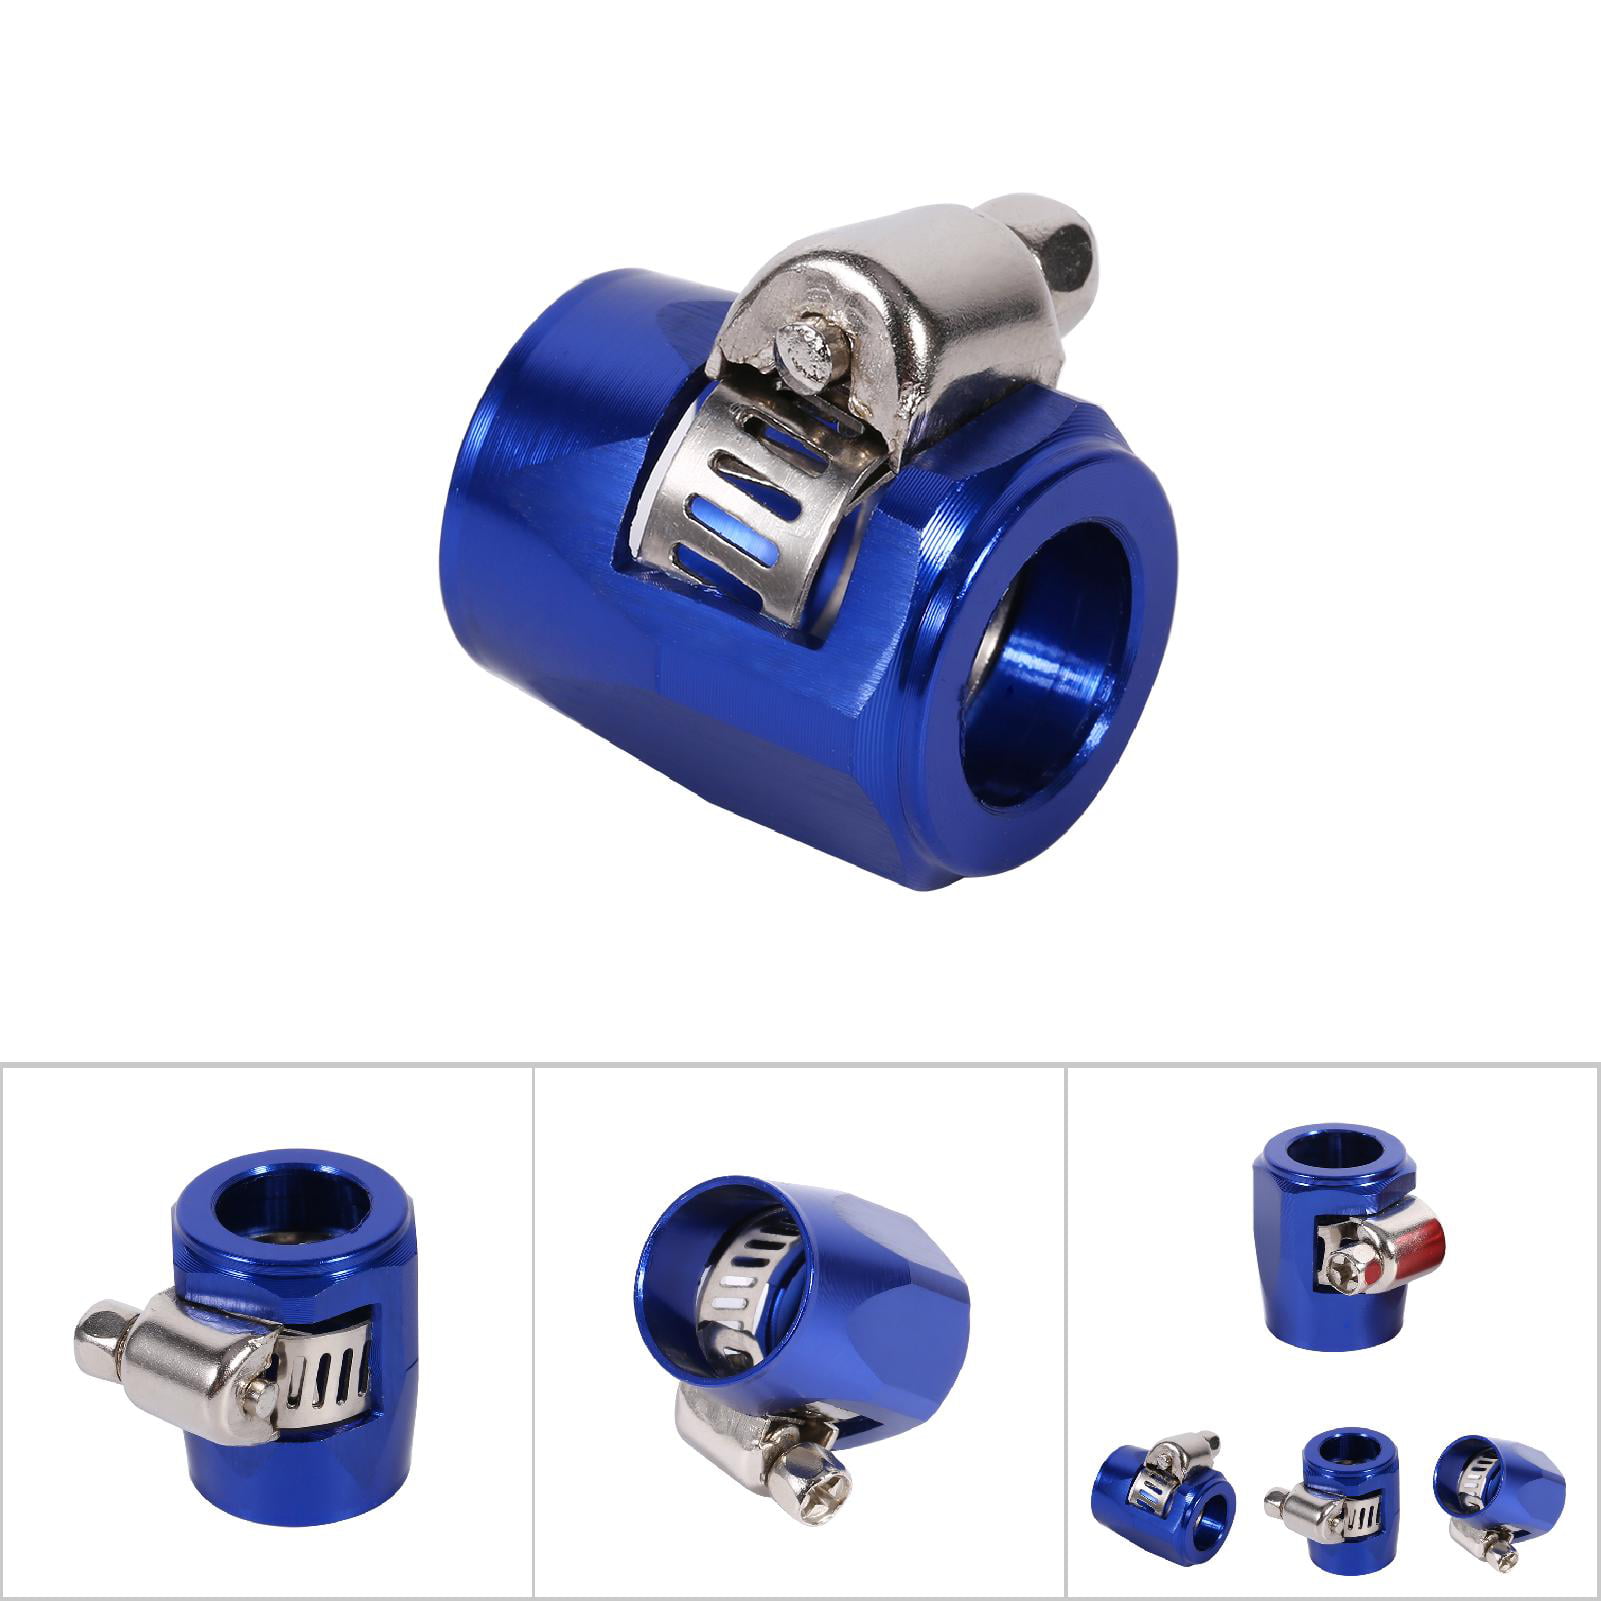 Hose End Finishers Blue AN6 Aluminum Alloy Hose End Finishers Fuel Oil Water Line Clip Clamp for Auto Car Hose Finishers 